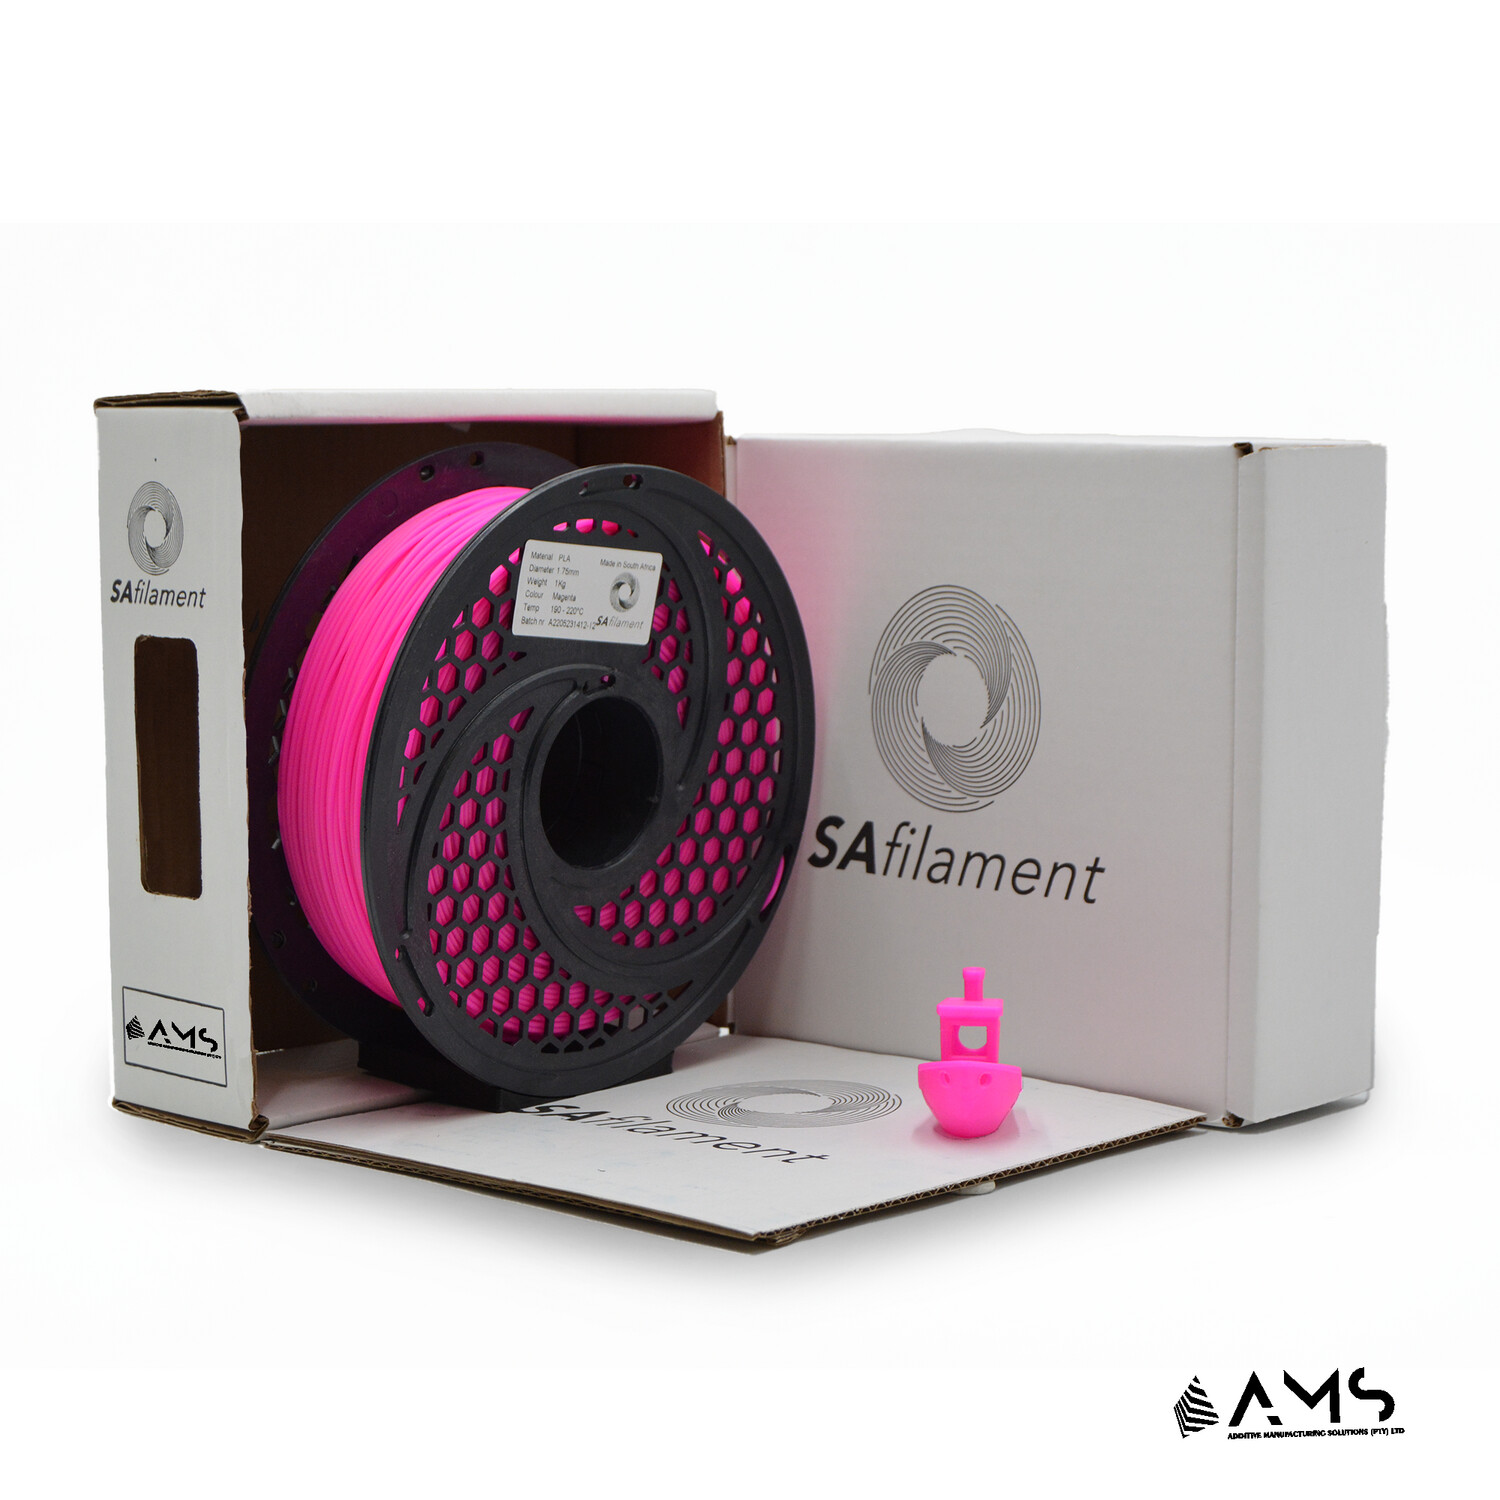 UV Neon Astral Pink PLA Filament, 1Kg, 1.75mm by SA Filament